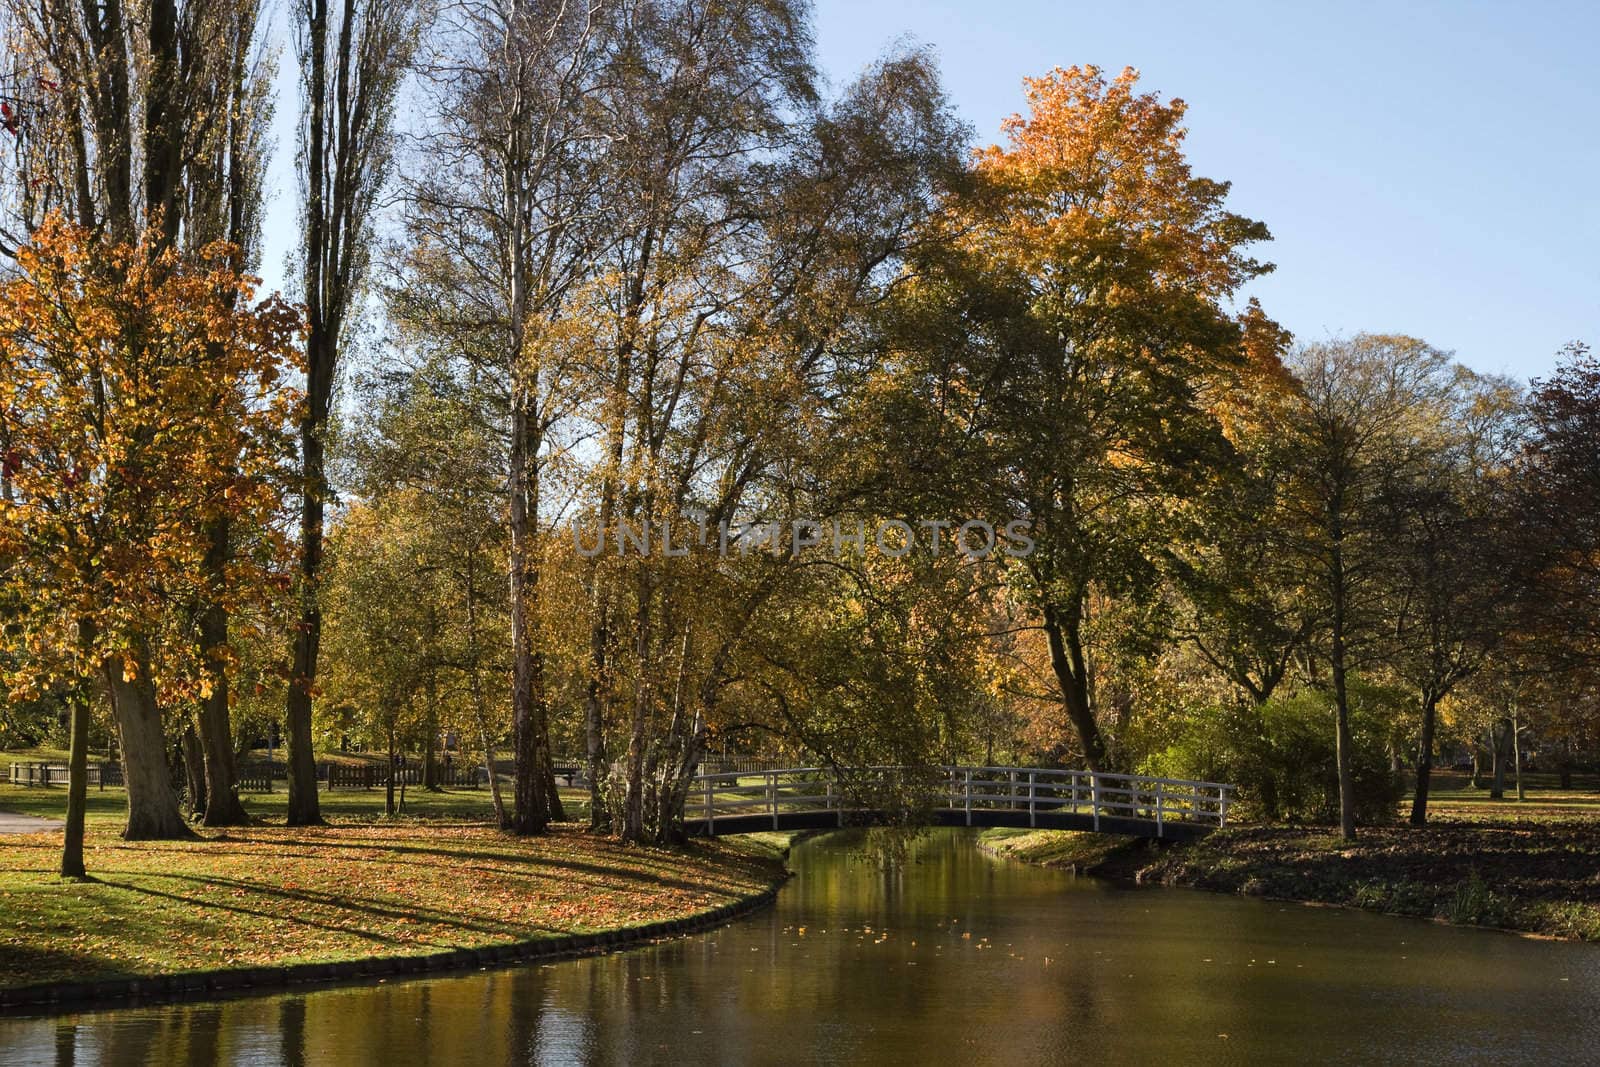 Pond and white bridge in park in fall by Colette